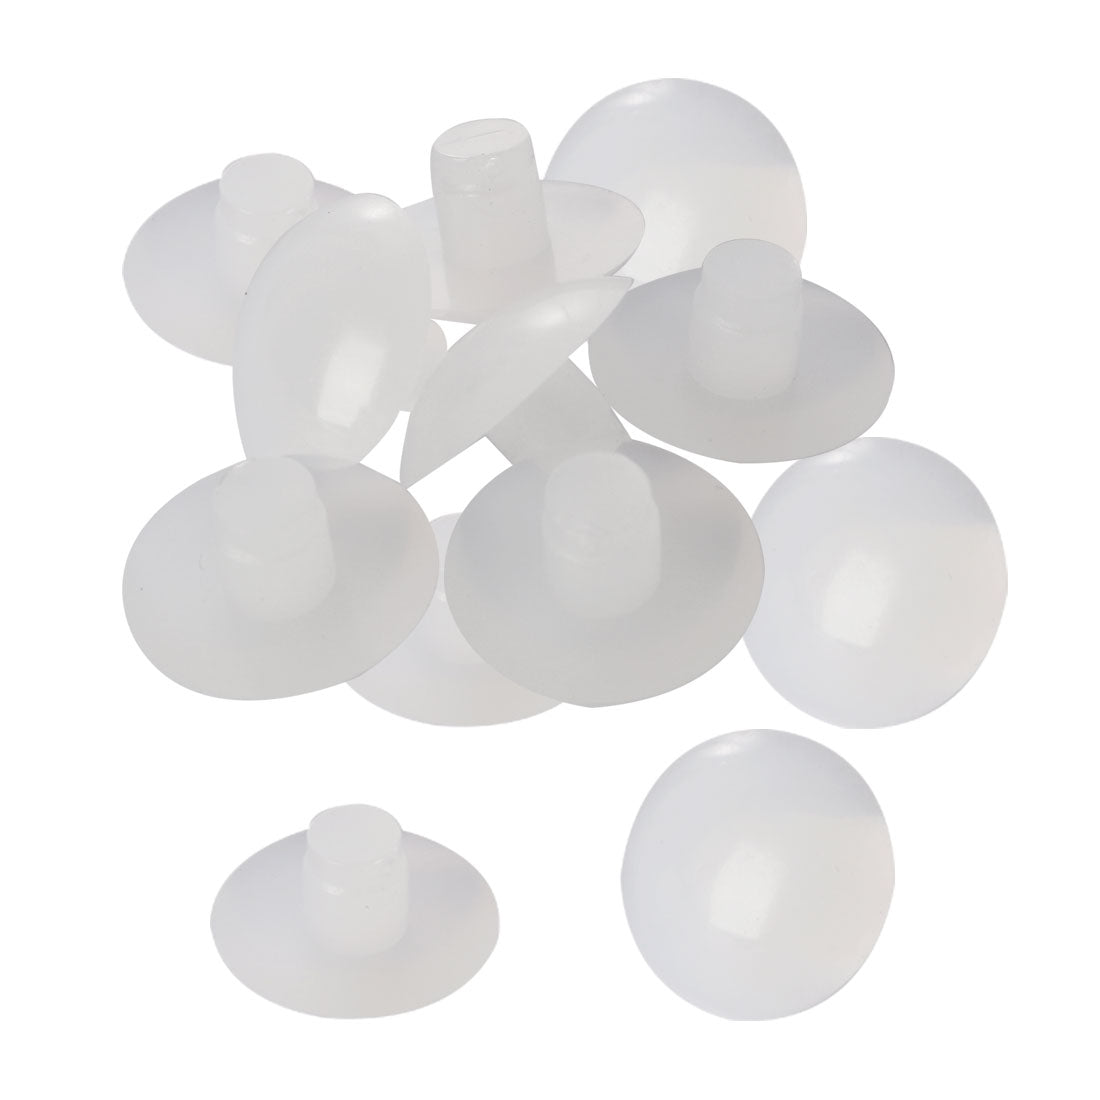 uxcell Uxcell 12pcs 6mm White Stem Bumpers Glide, Patio Outdoor Furniture Glass Table Top Anti-collision Embedded